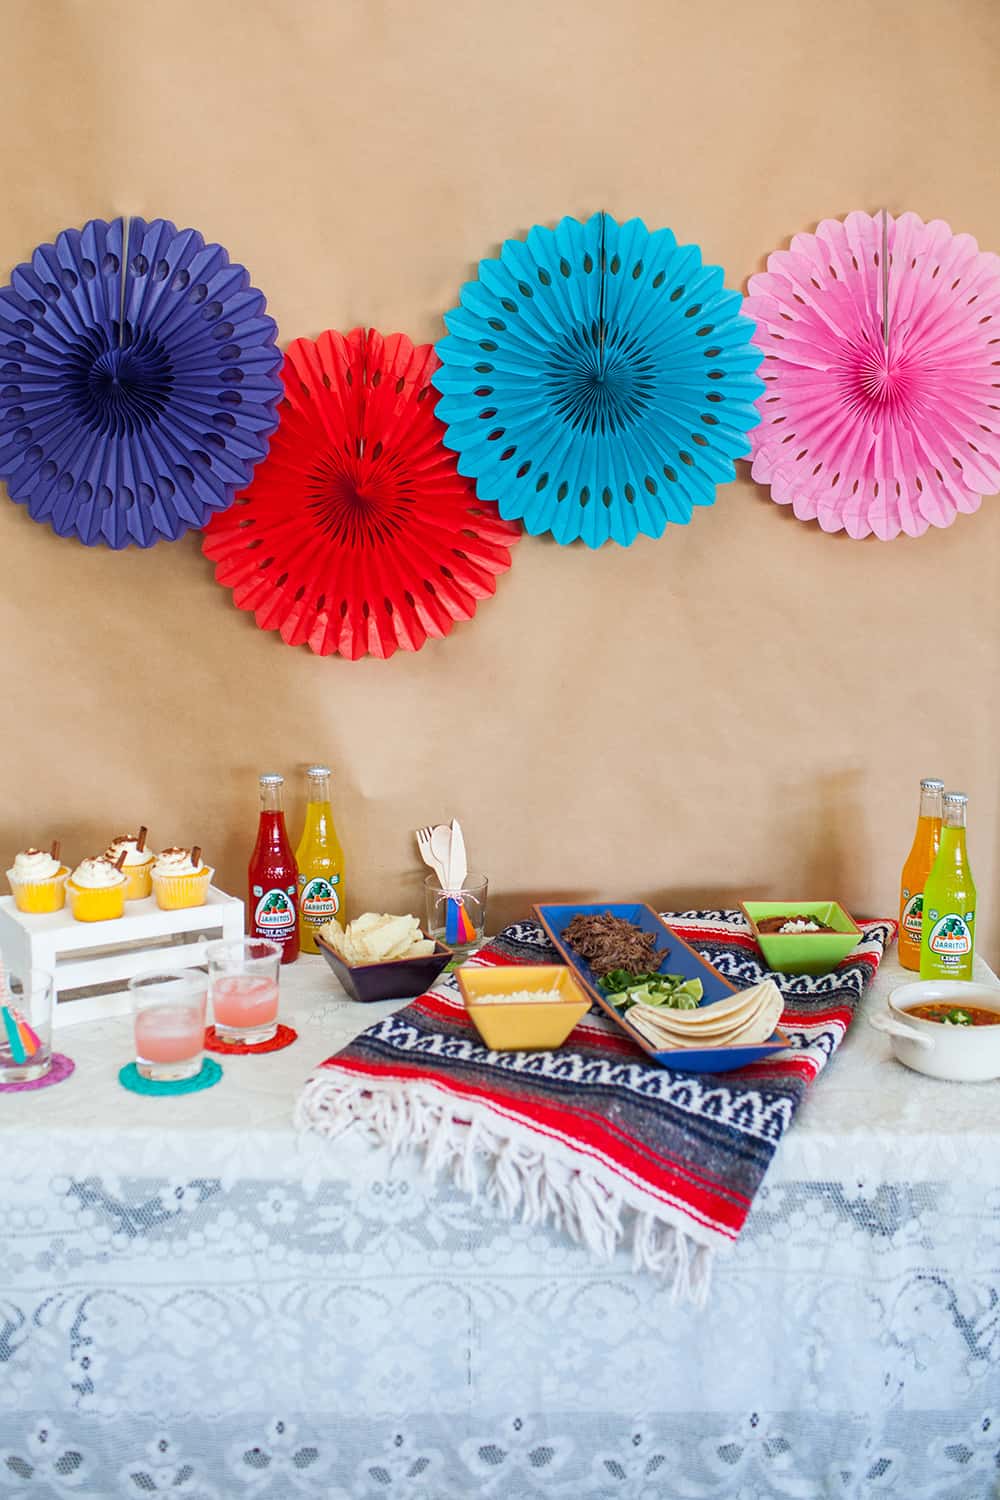 This Cinco de Mayo party inspiration will give you all the ideas you need for the perfect Cinco de Mayo parties and recipes!